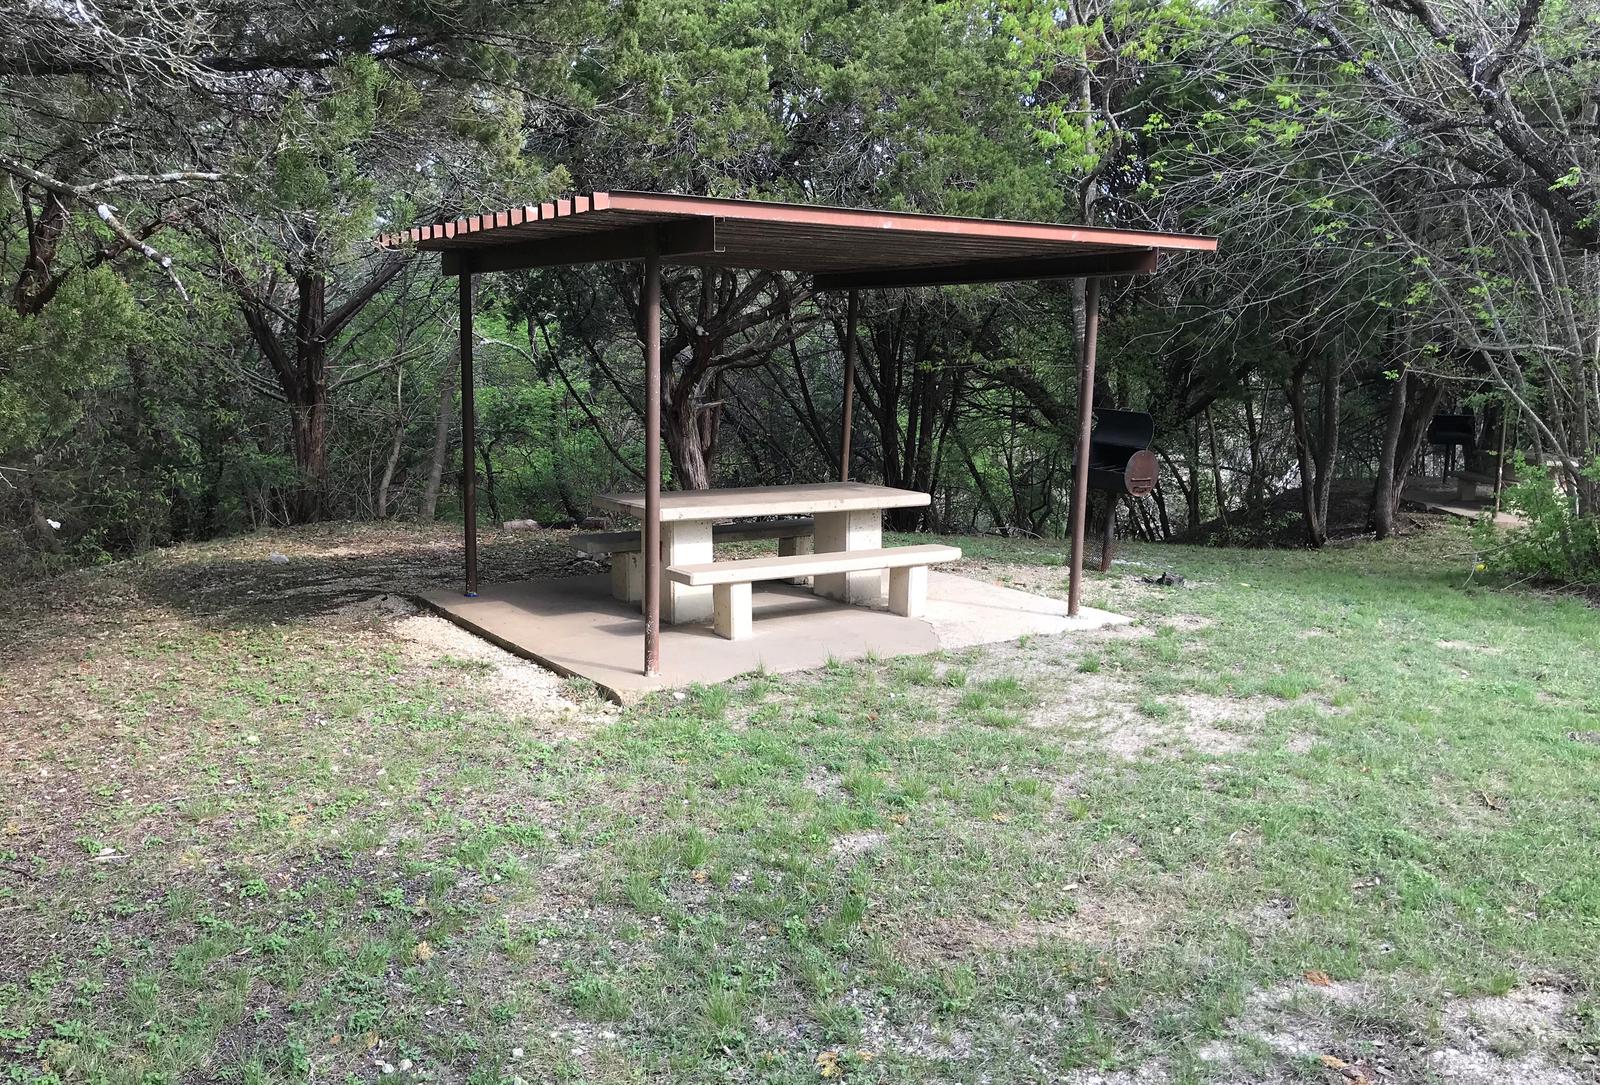 Covered picnic table and grill at site